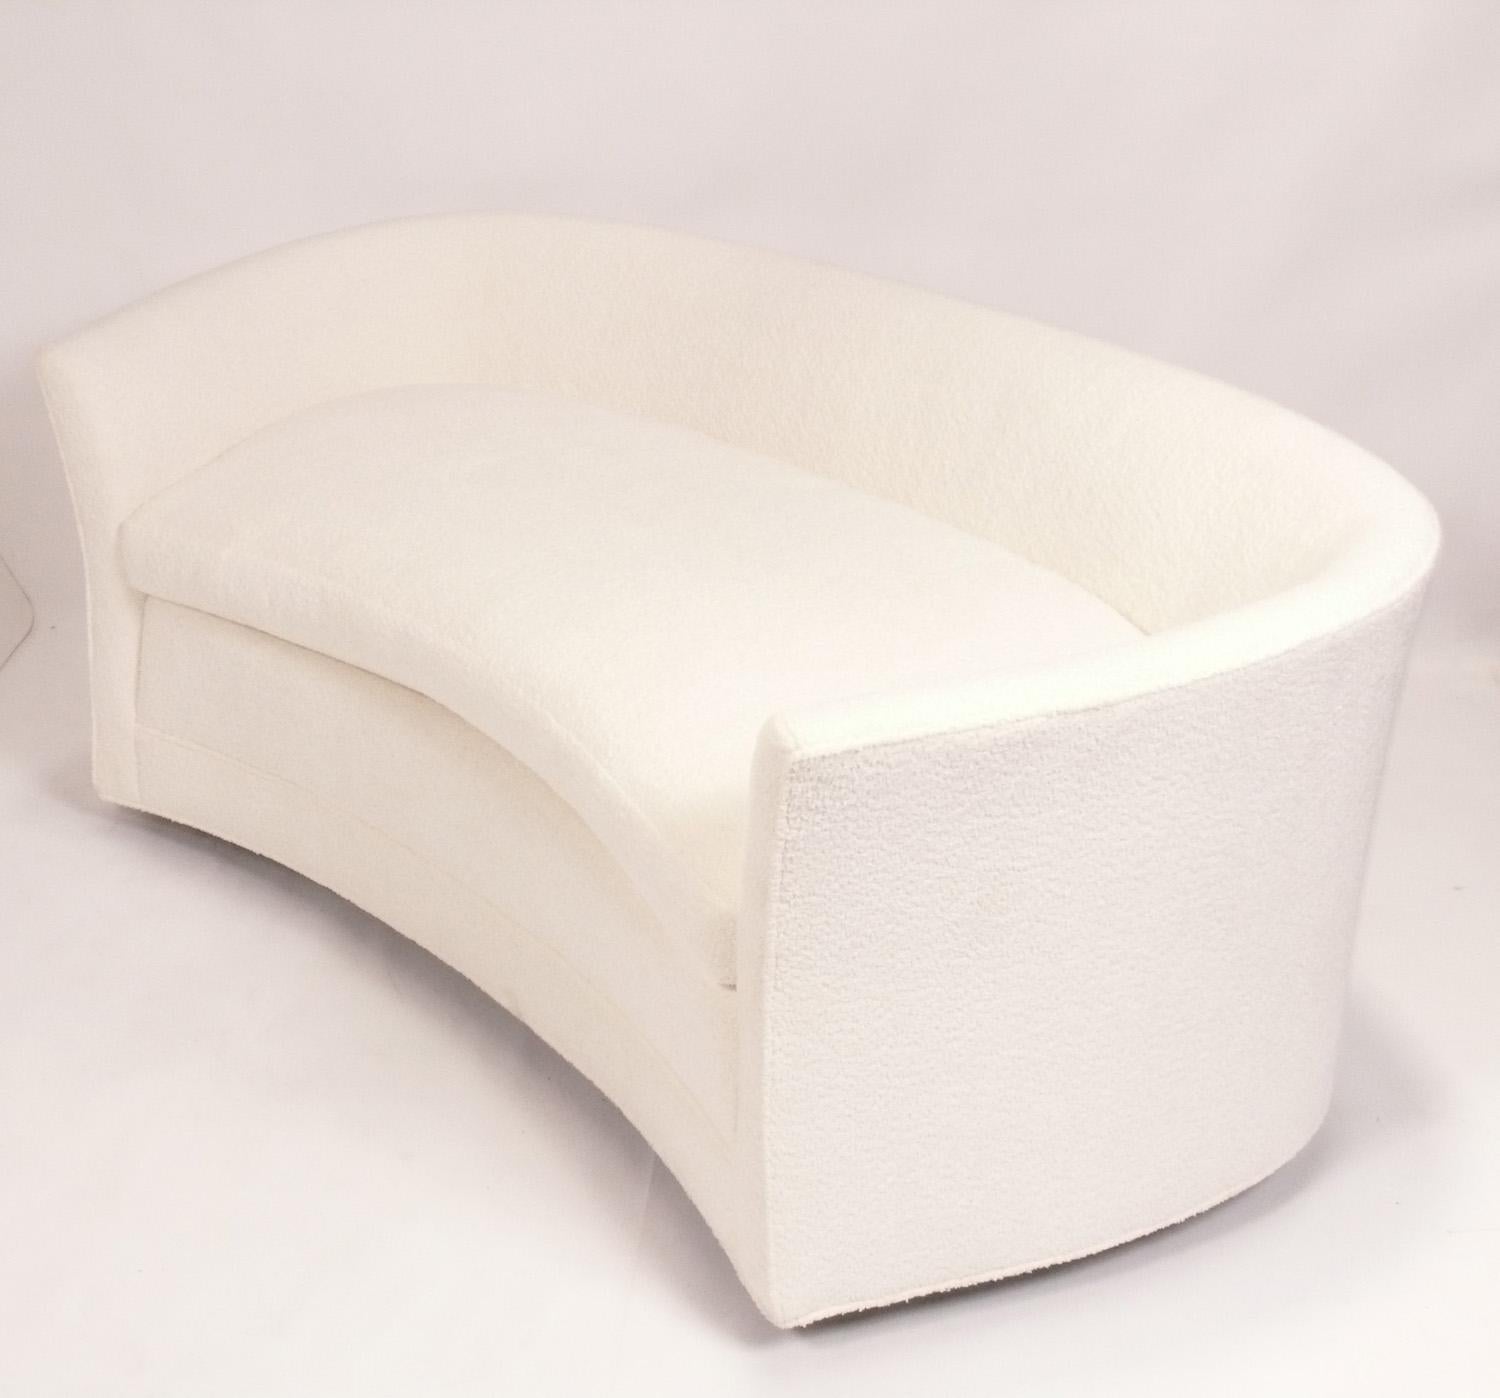 Curvaceous Mid Century Settee or Sofa, in the manner of Vladimir Kagan, American, circa 1960s. It has recently been reupholstered in an ivory white color boucle fabric. 